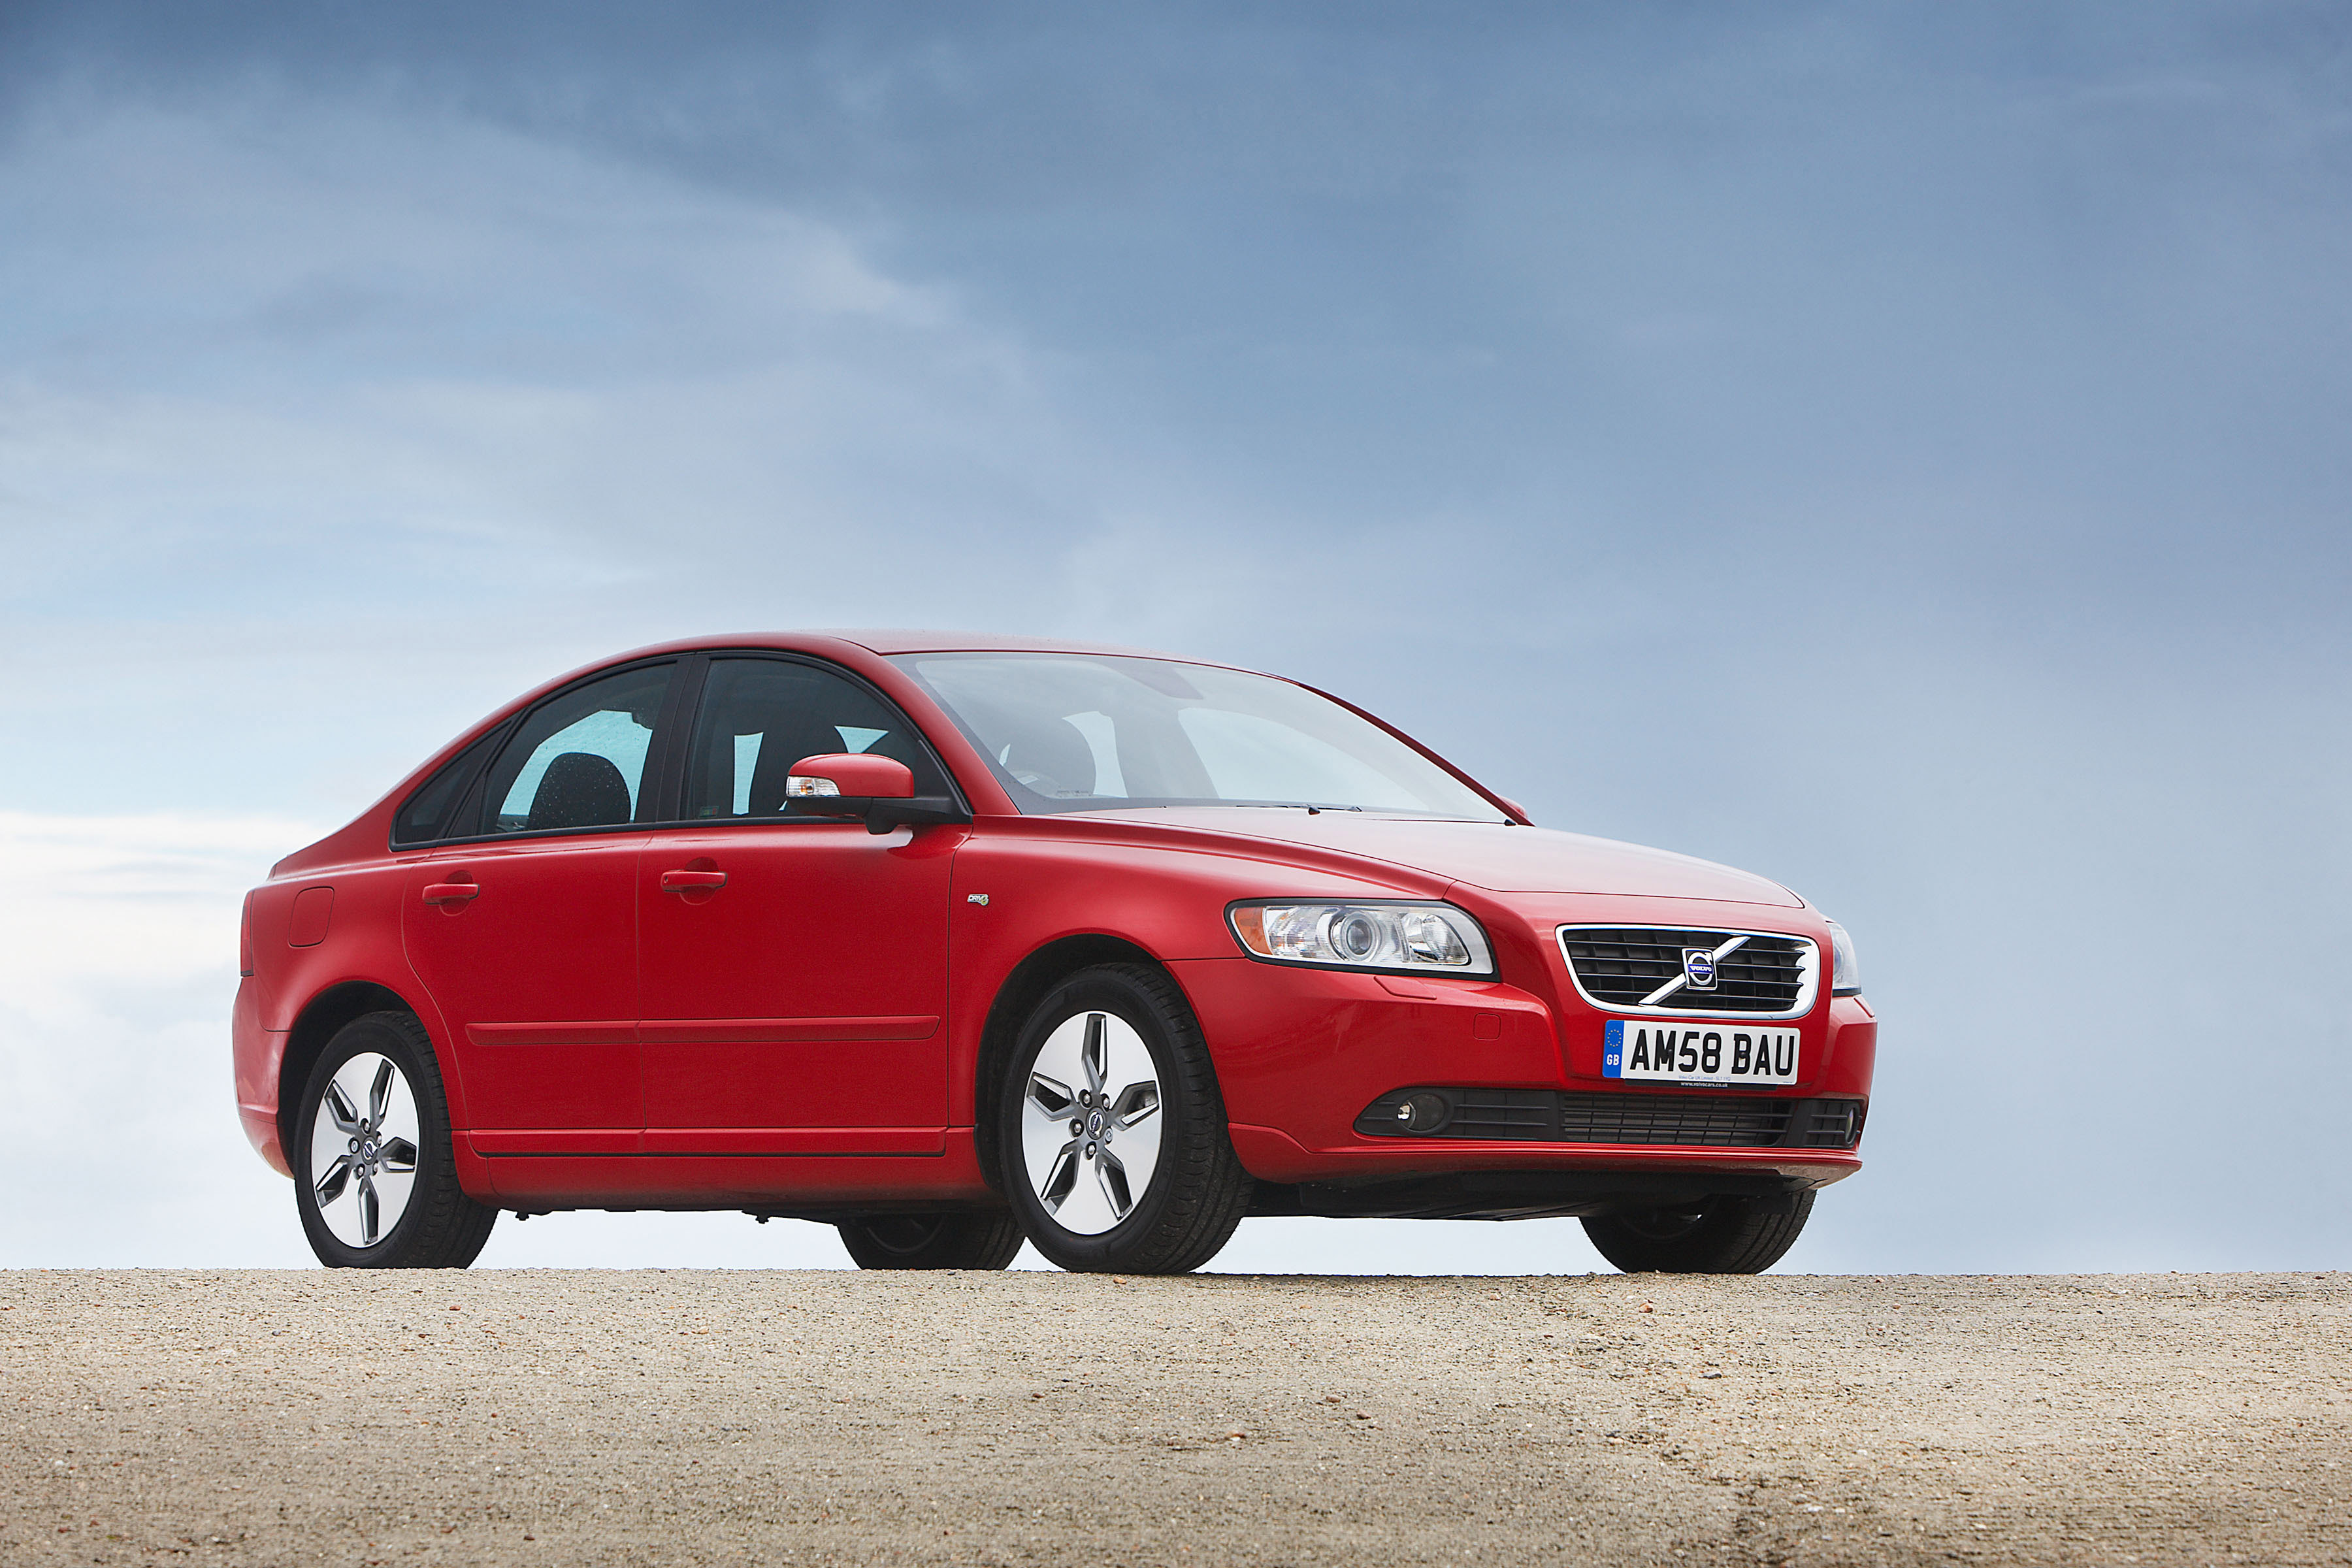 Volvo S40 DRIVe 1.6D with Start/Stop